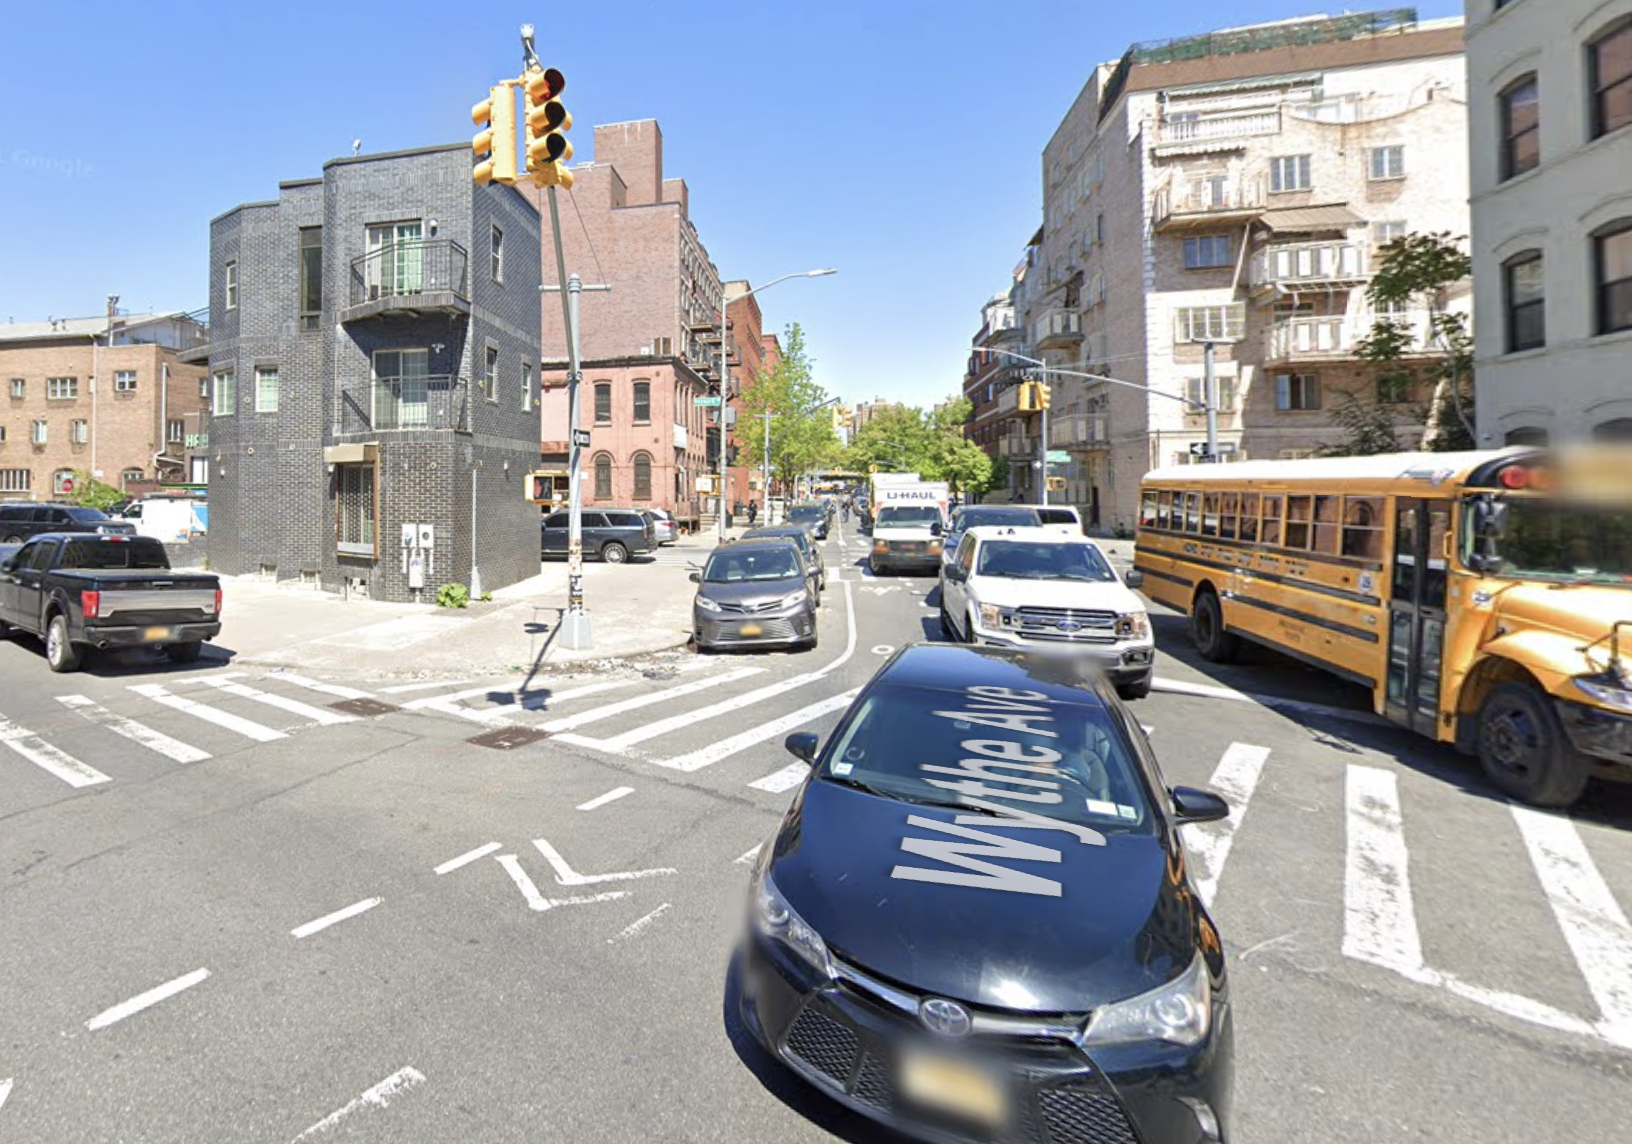 The NYPD said the girl was hit near the intersection of Wallabout Street and Wythe Avenue in Williamsburg around 2:42 p.m. Tuesday.